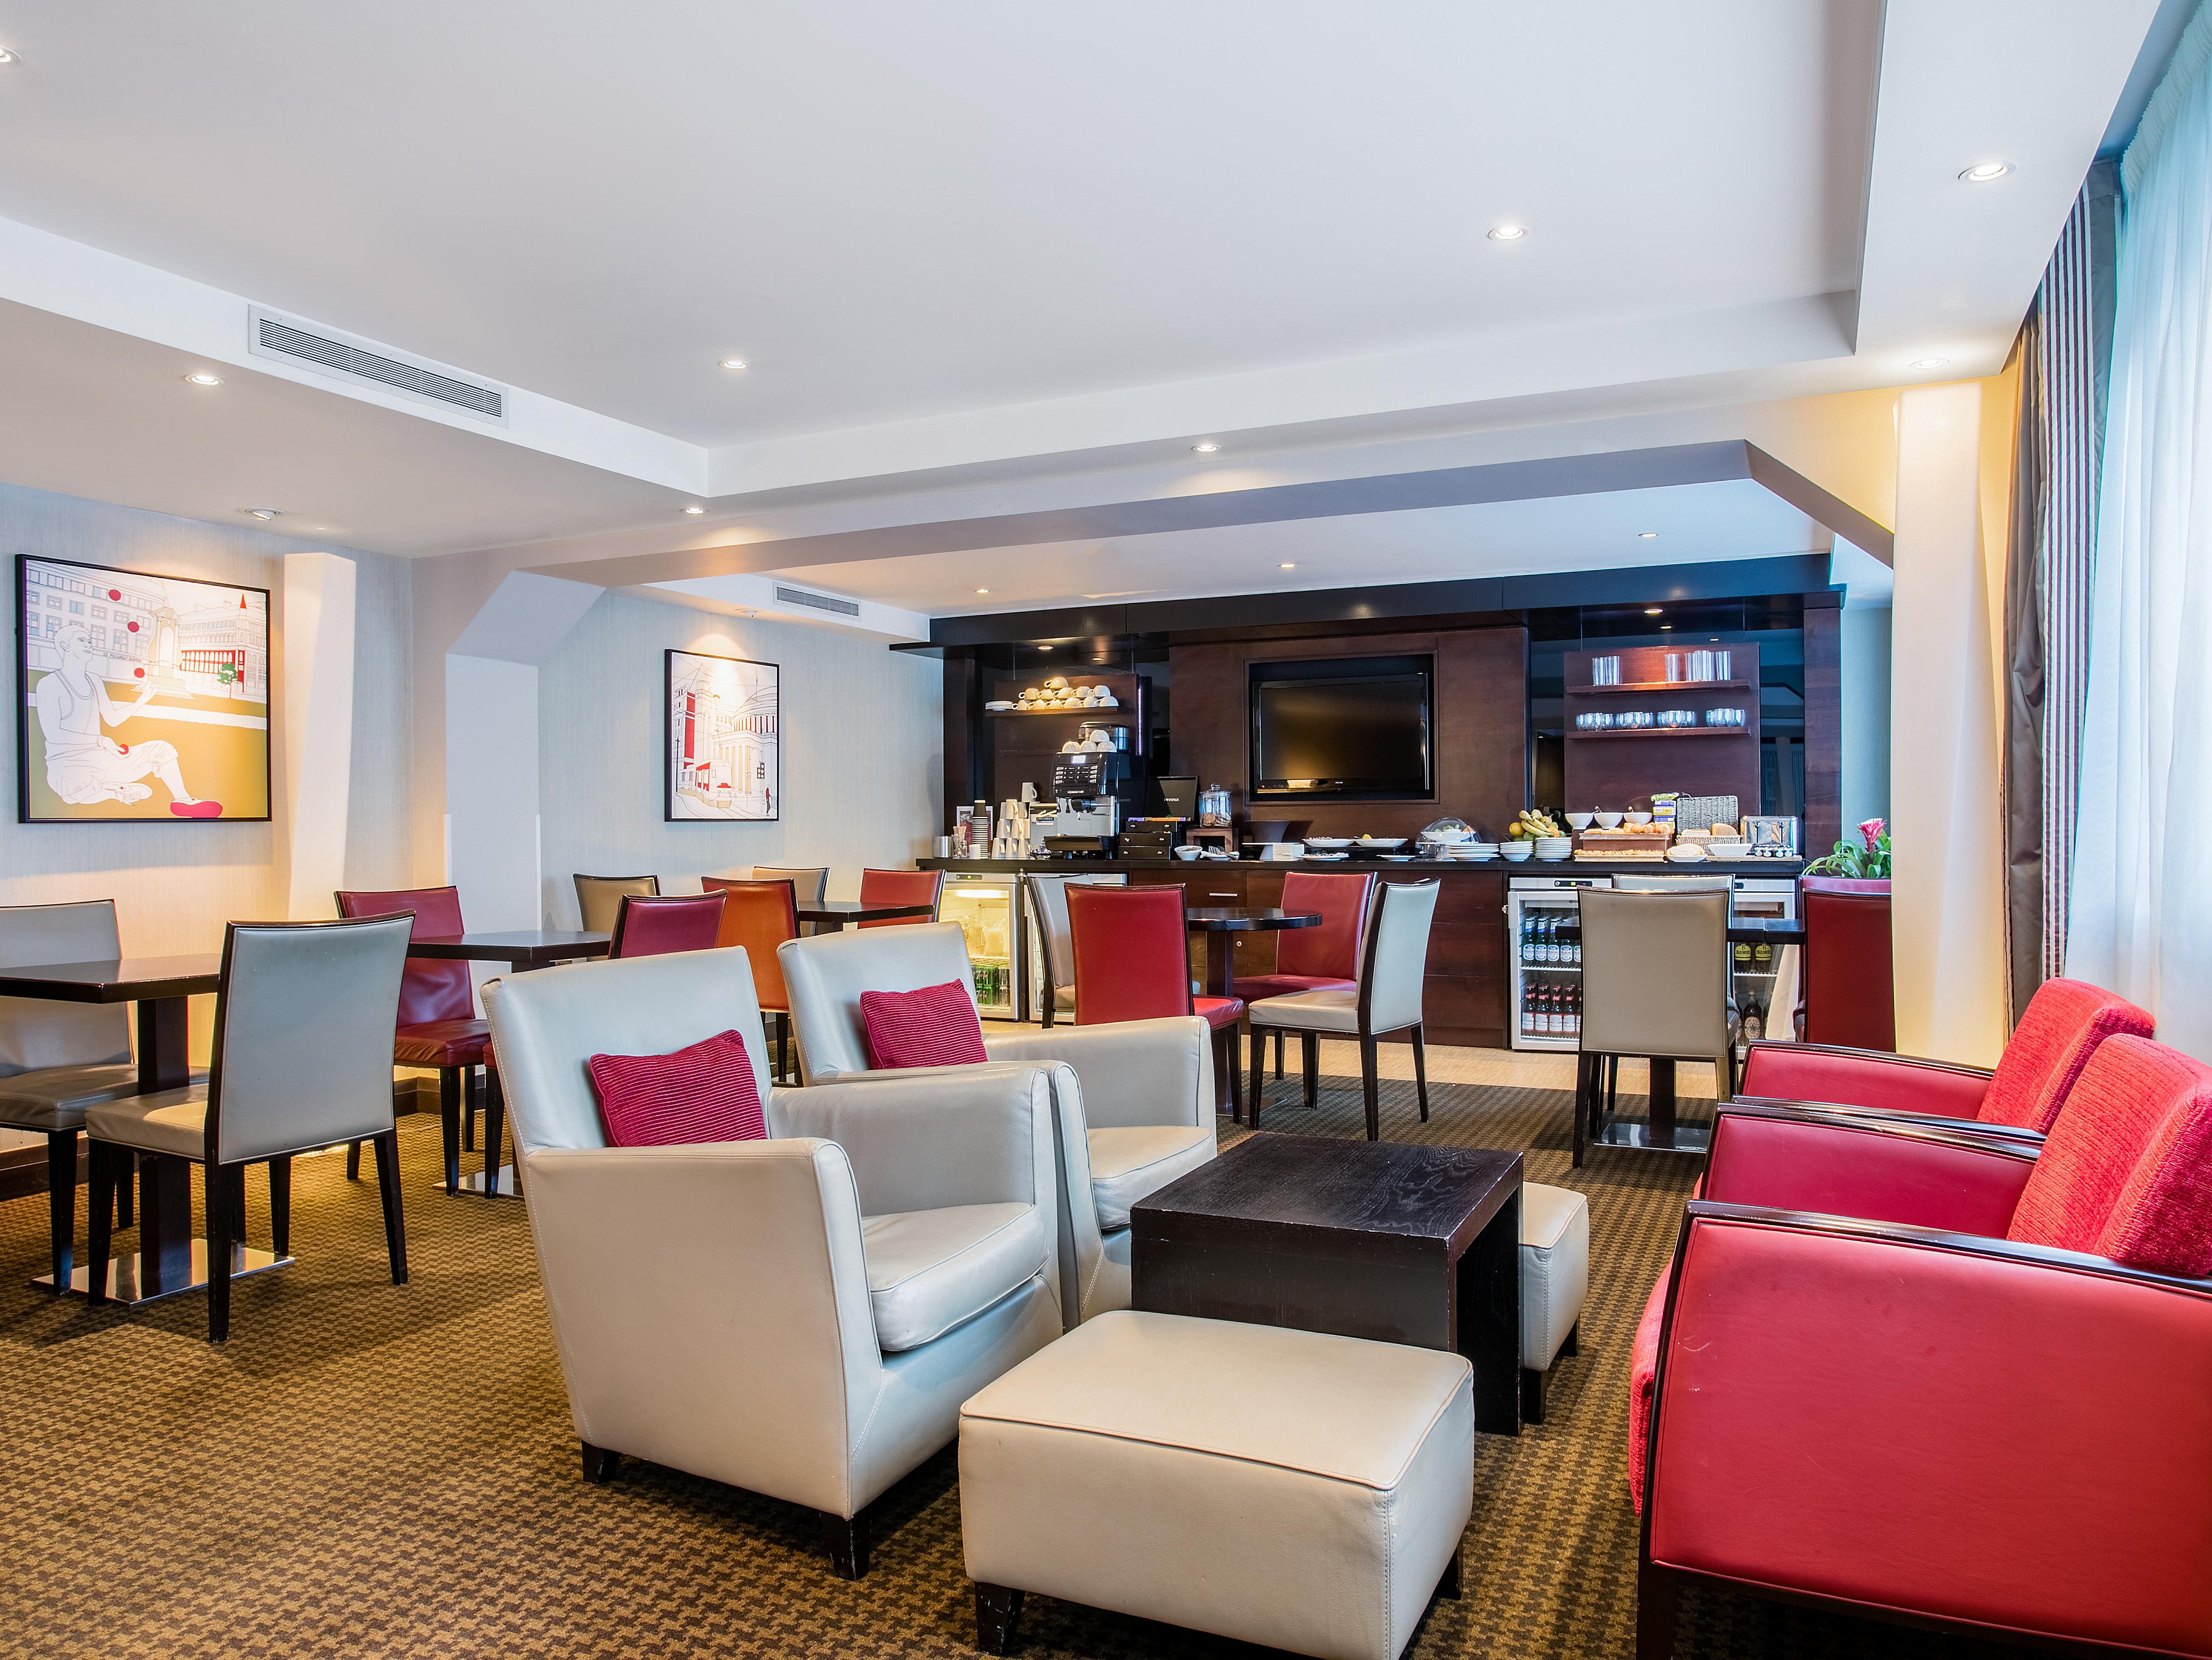 Overview And Fact Sheet For The Crowne Plaza Manchester Airport